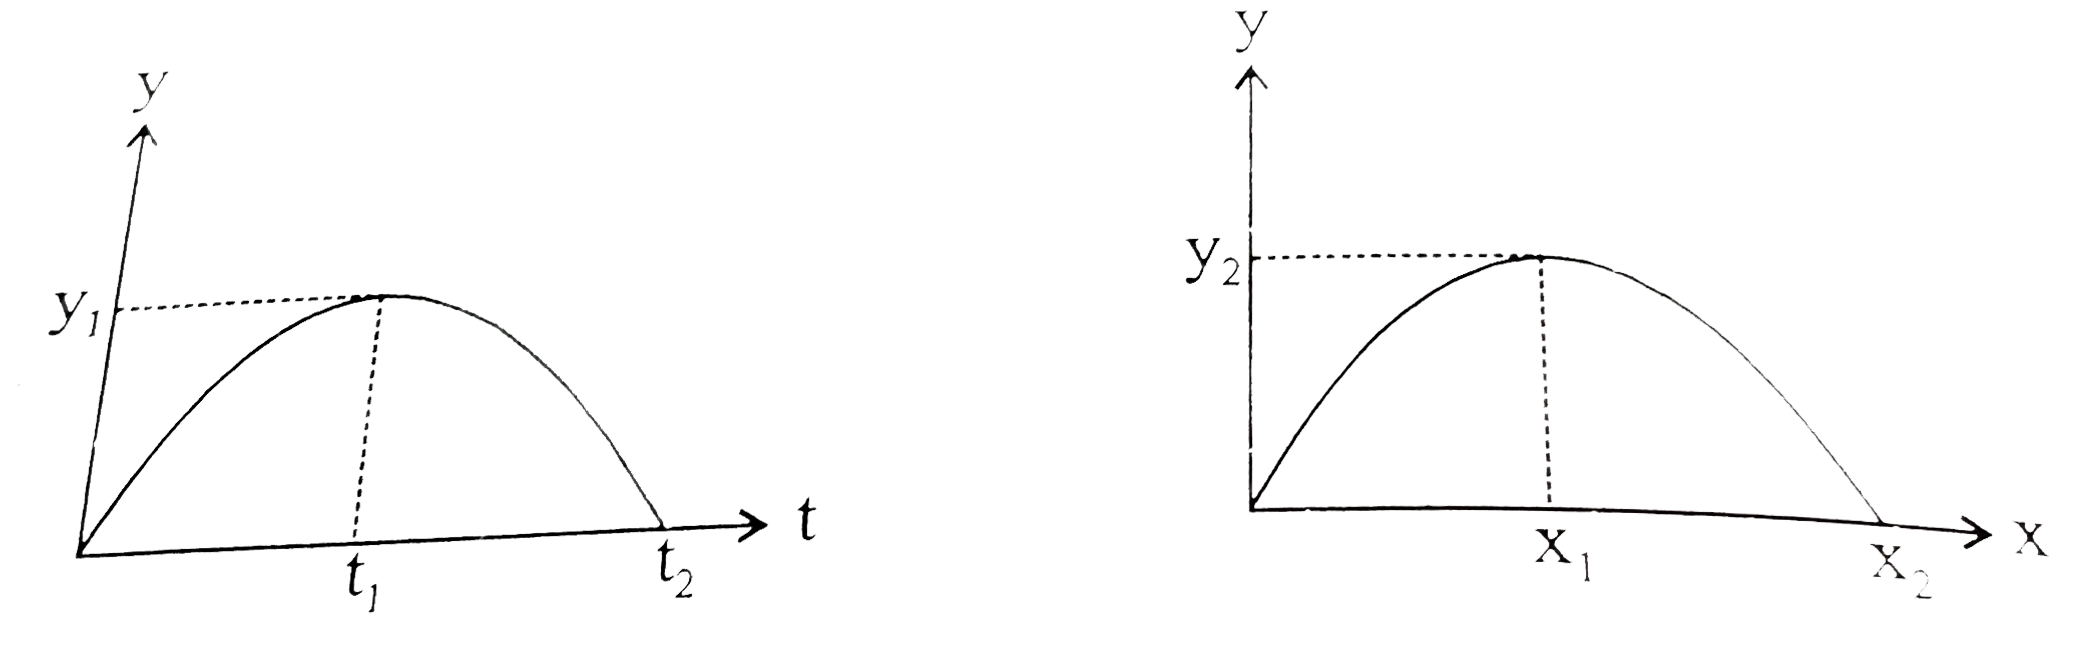 y-t graph of a projectile parabola is drawn in figure 1 and it's path is drawn in figure 2. (Y vertical up,x horizontal).